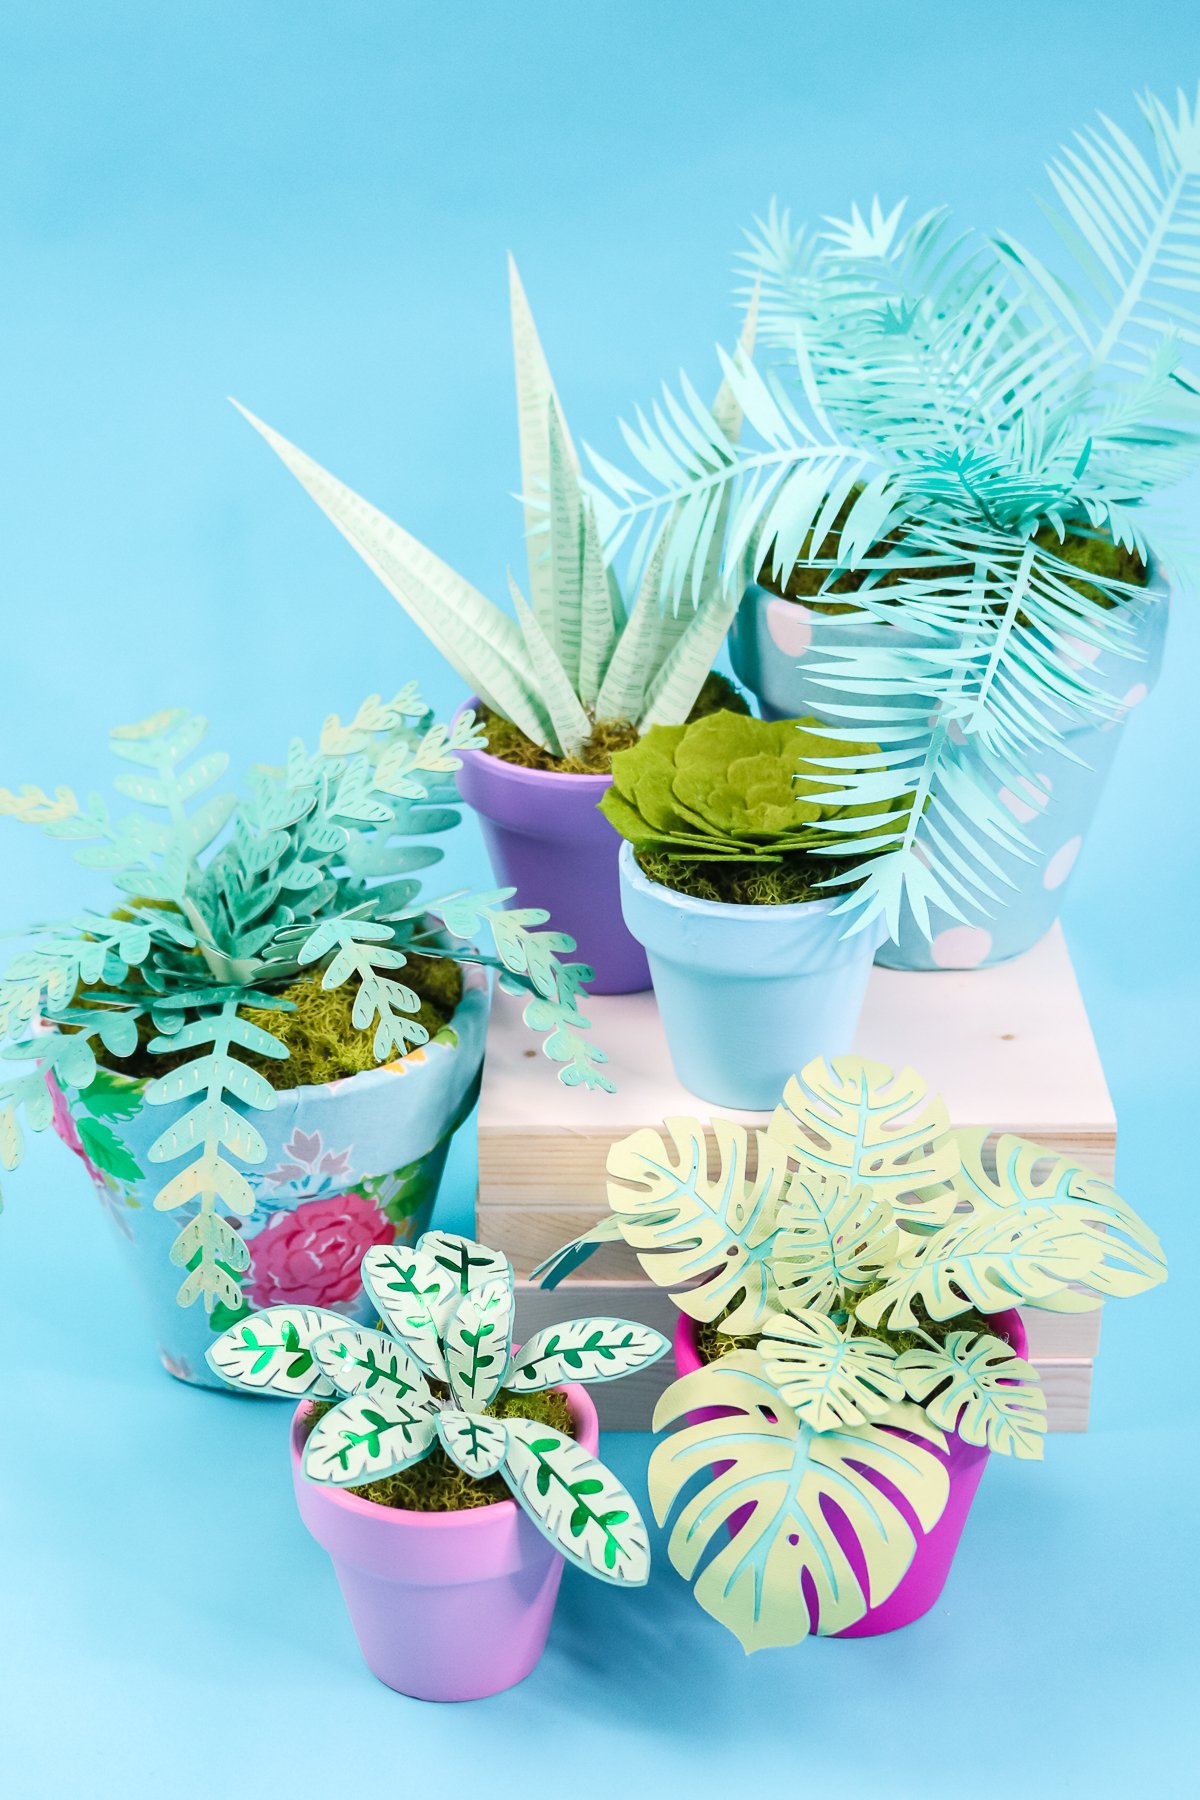 How to Make Paper Plants with a Cricut for a Garden Party - Angie